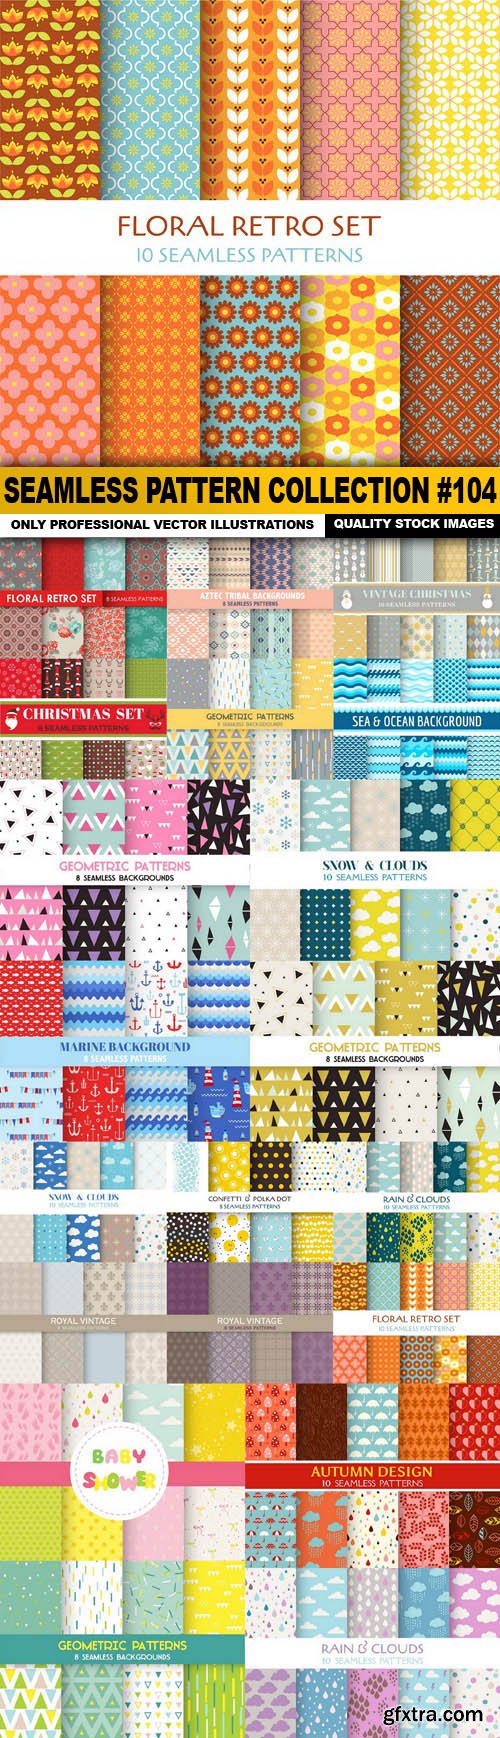 Seamless Pattern Collection #104 - 20 Vector